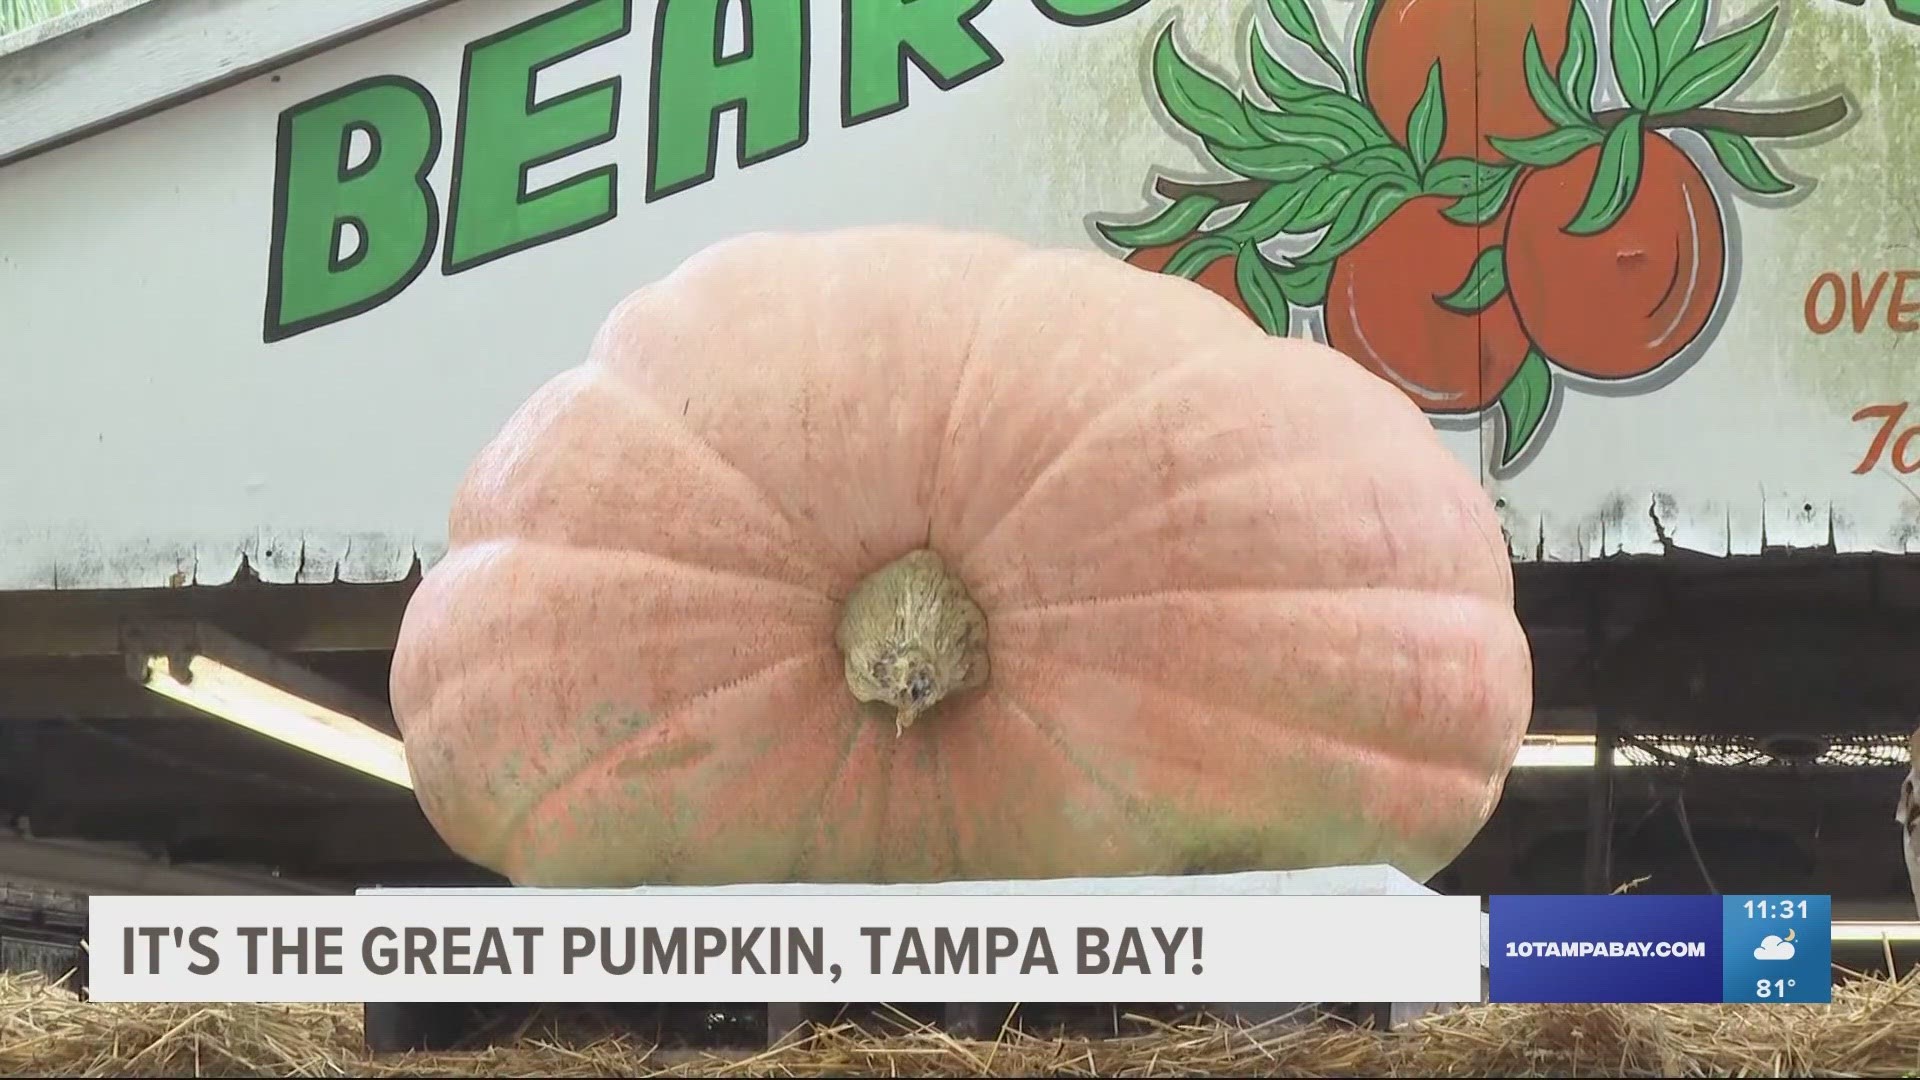 People will be able to catch a glimpse of this record-setting pumpkin all month long at Bearss Groves.